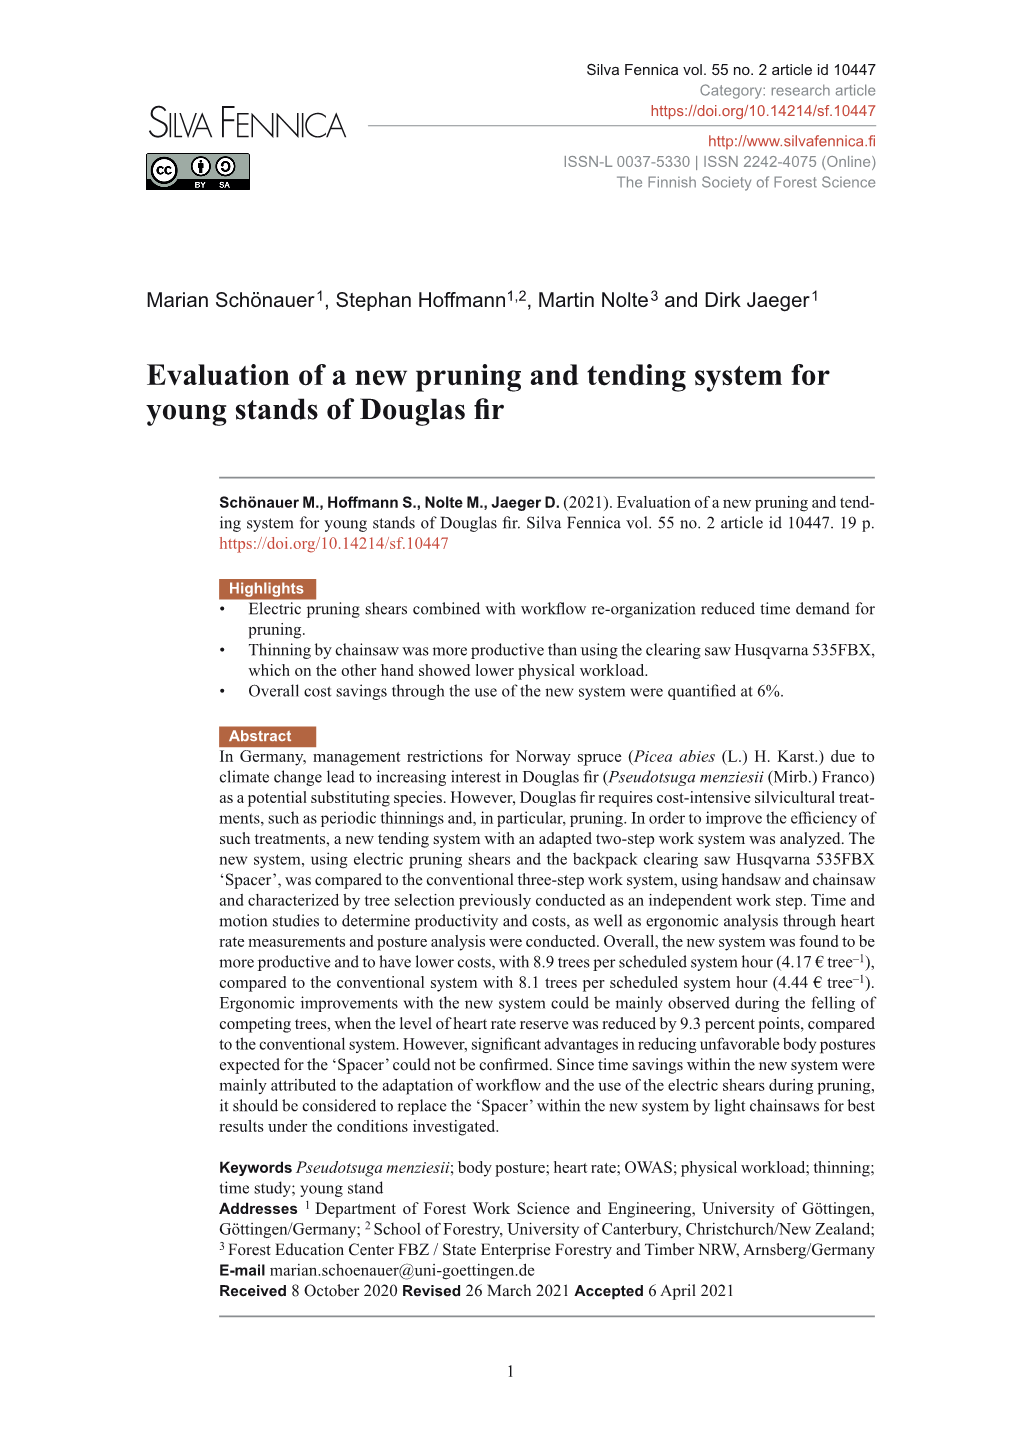 Evaluation of a New Pruning and Tending System for Young Stands of Douglas Fir